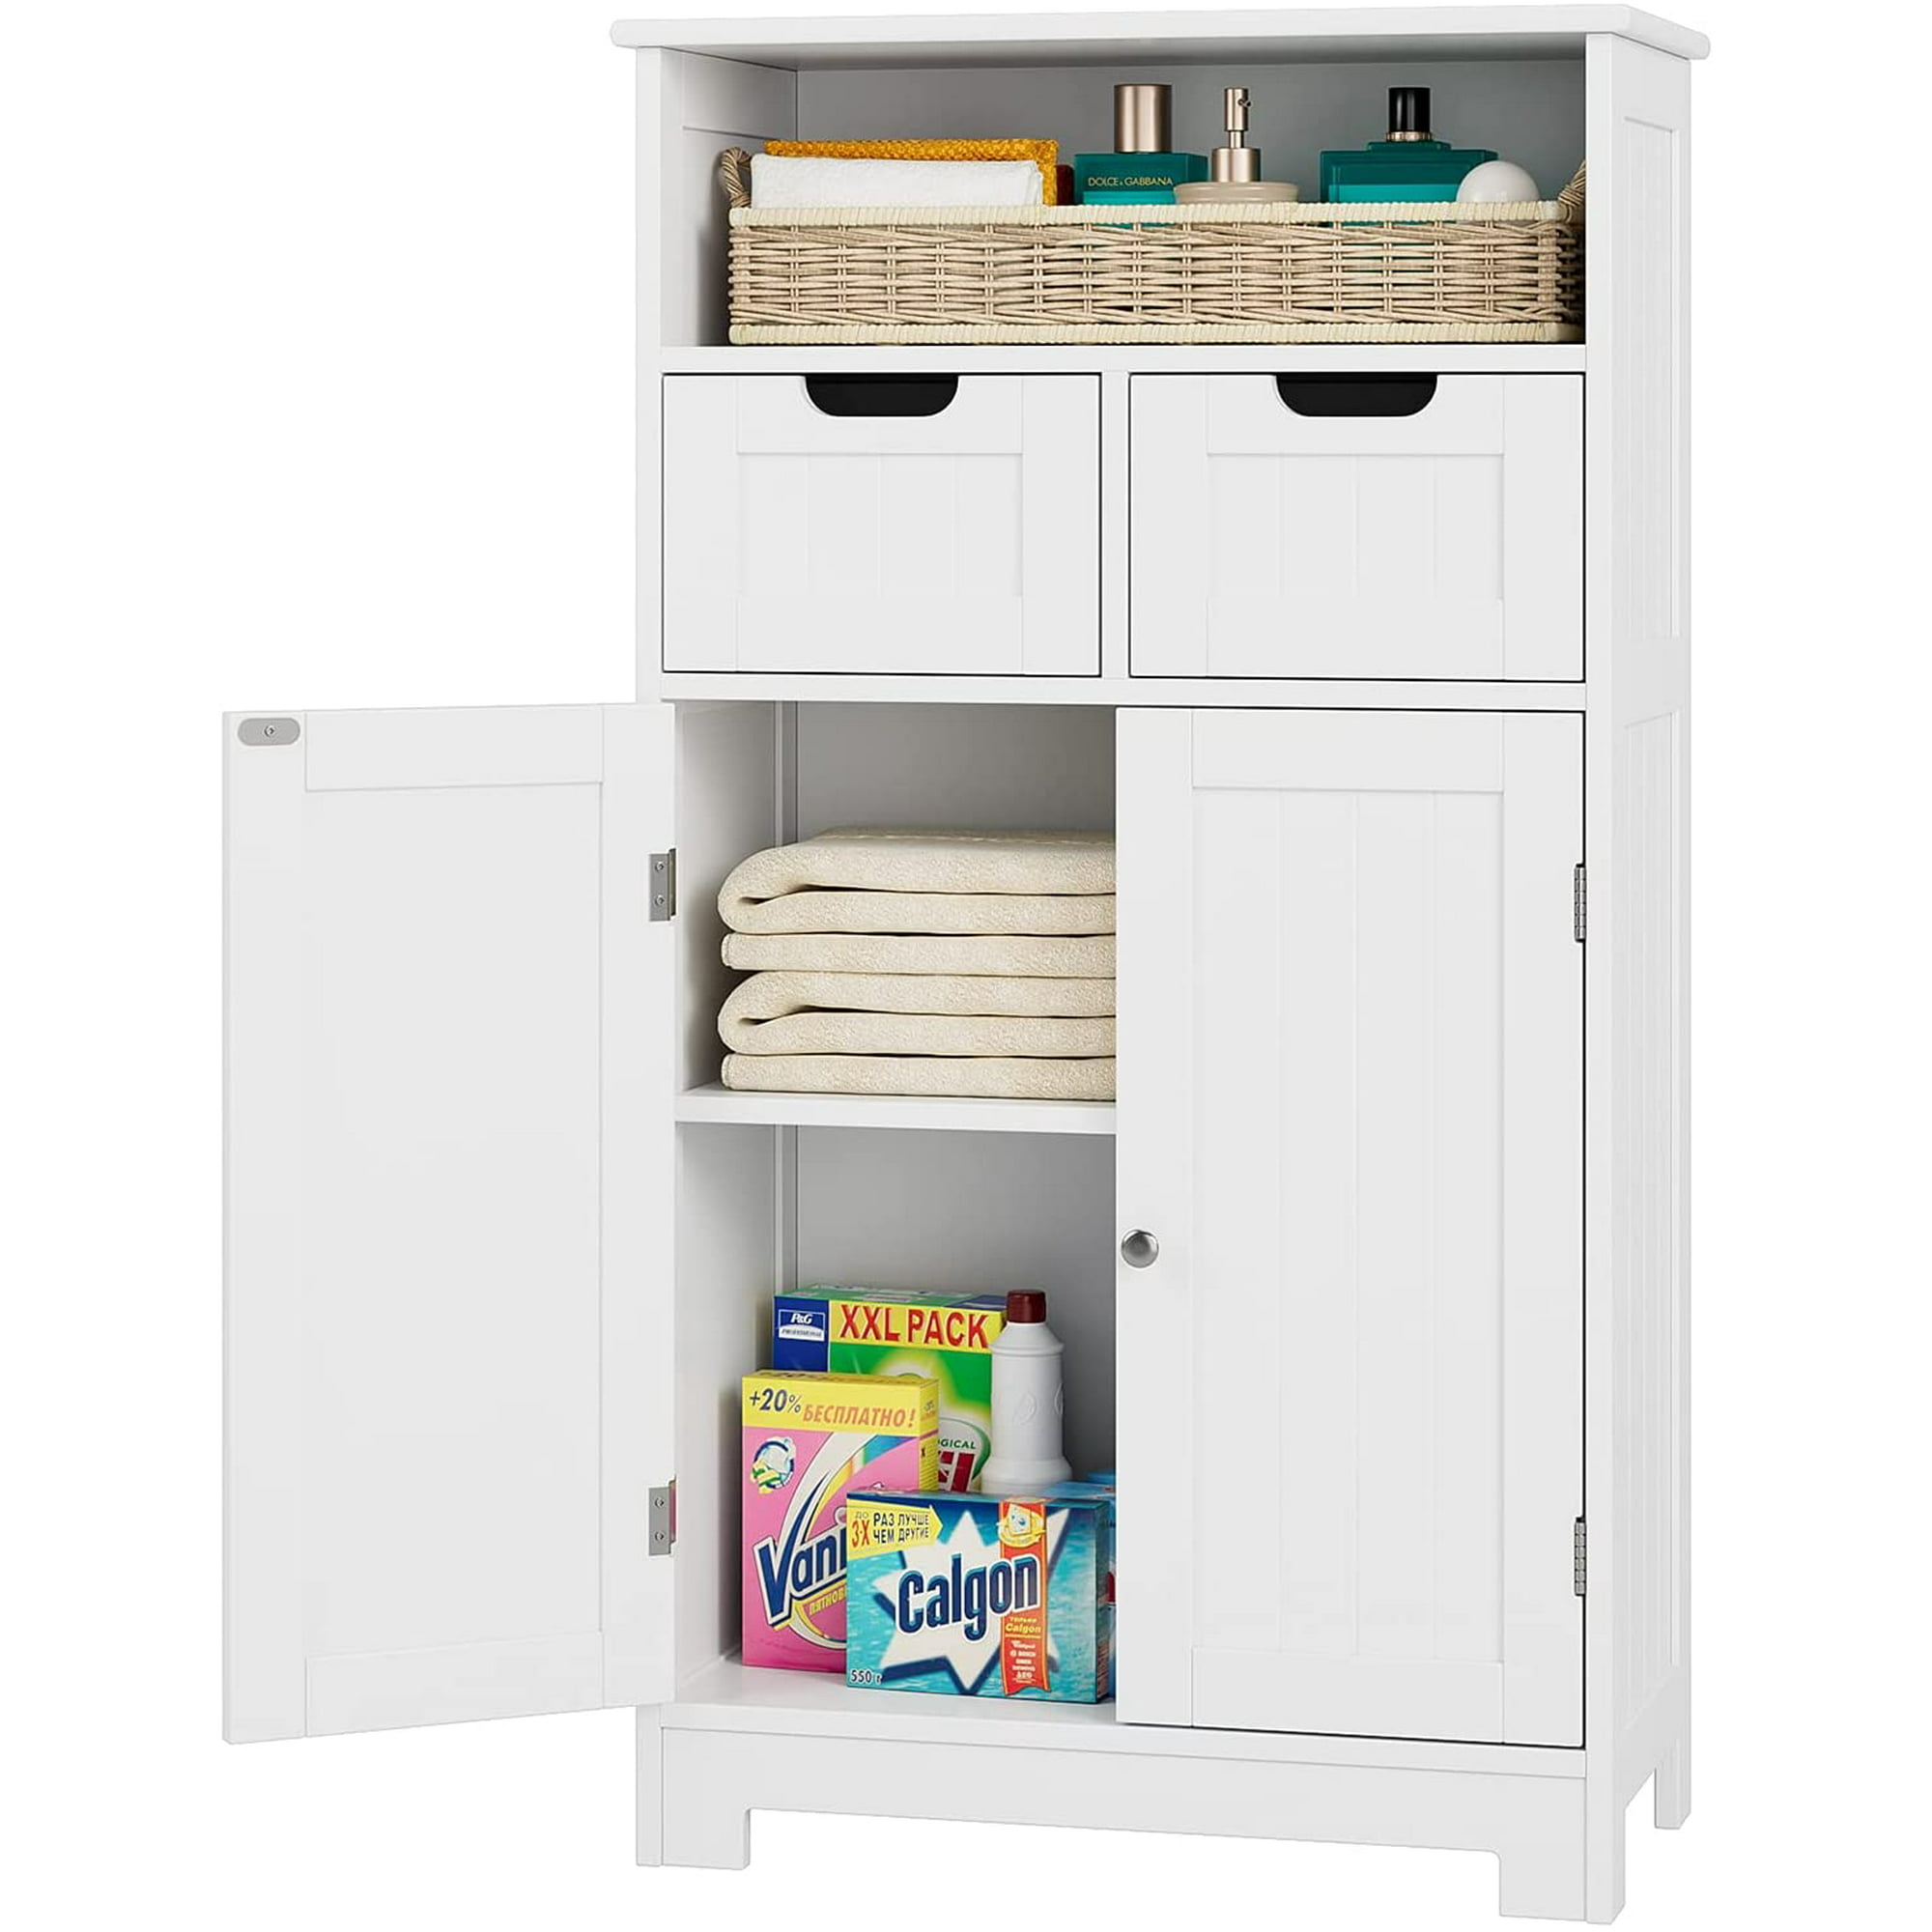 Homfa Bathroom Floor Storage Cabinet, Wood Linen Cabinet with Doors and Drawers and Adjustable Shelf, Kitchen Cupboard, Free Standing Organizer for Living Room Entryway Home Office, White - image 1 of 12